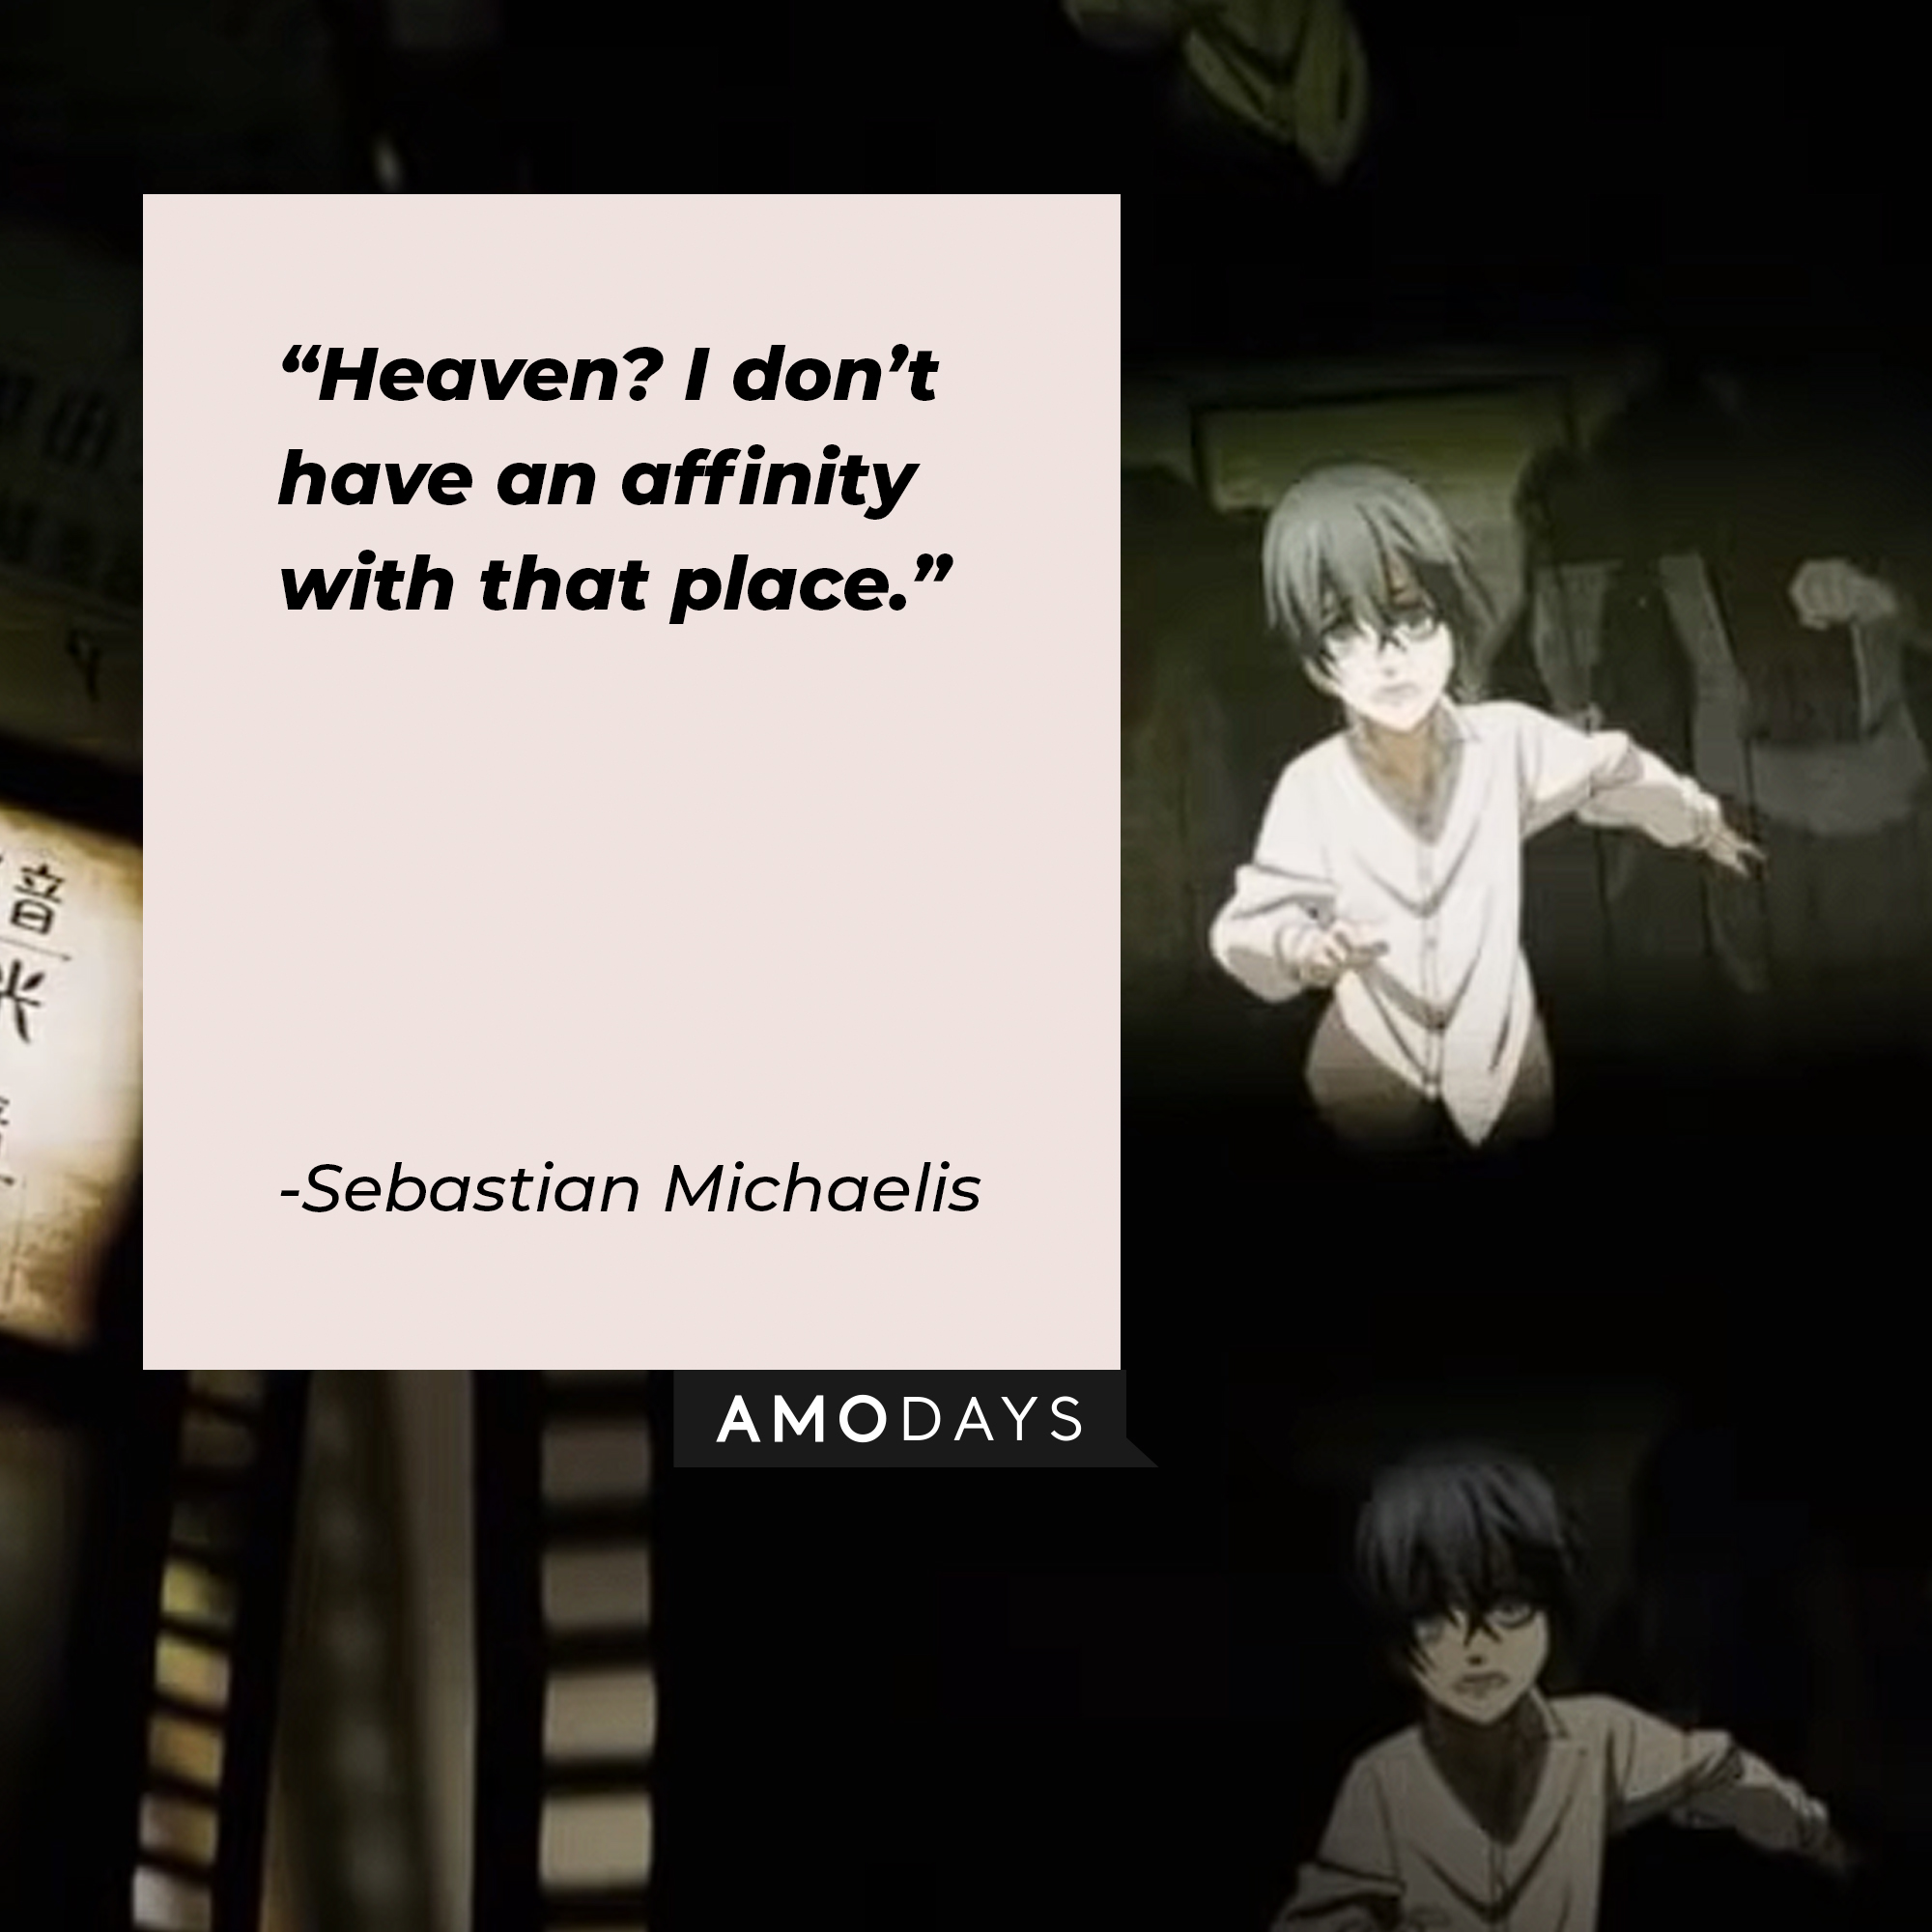 An image from "Black Butler" with Sebastian Michaelis' quote: "Heaven? I don’t have an affinity with that place." | Source: youtube.com/Crunchyroll Dubs